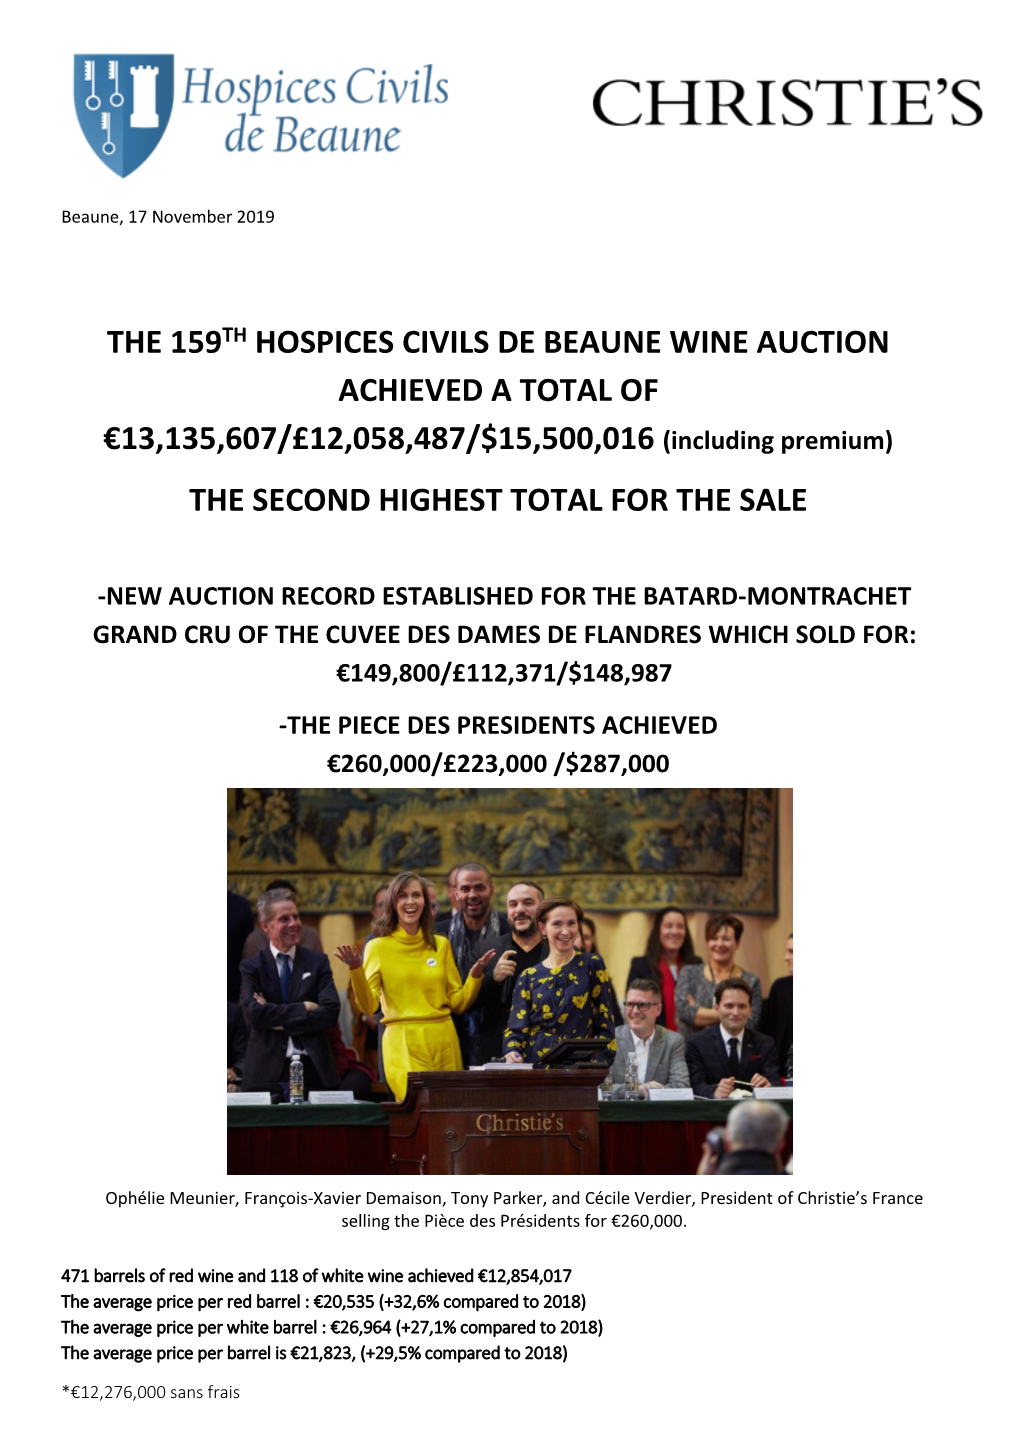 THE 159TH HOSPICES CIVILS DE BEAUNE WINE AUCTION ACHIEVED a TOTAL of €13,135,607/£12,058,487/$15,500,016 (Including Premium) the SECOND HIGHEST TOTAL for the SALE